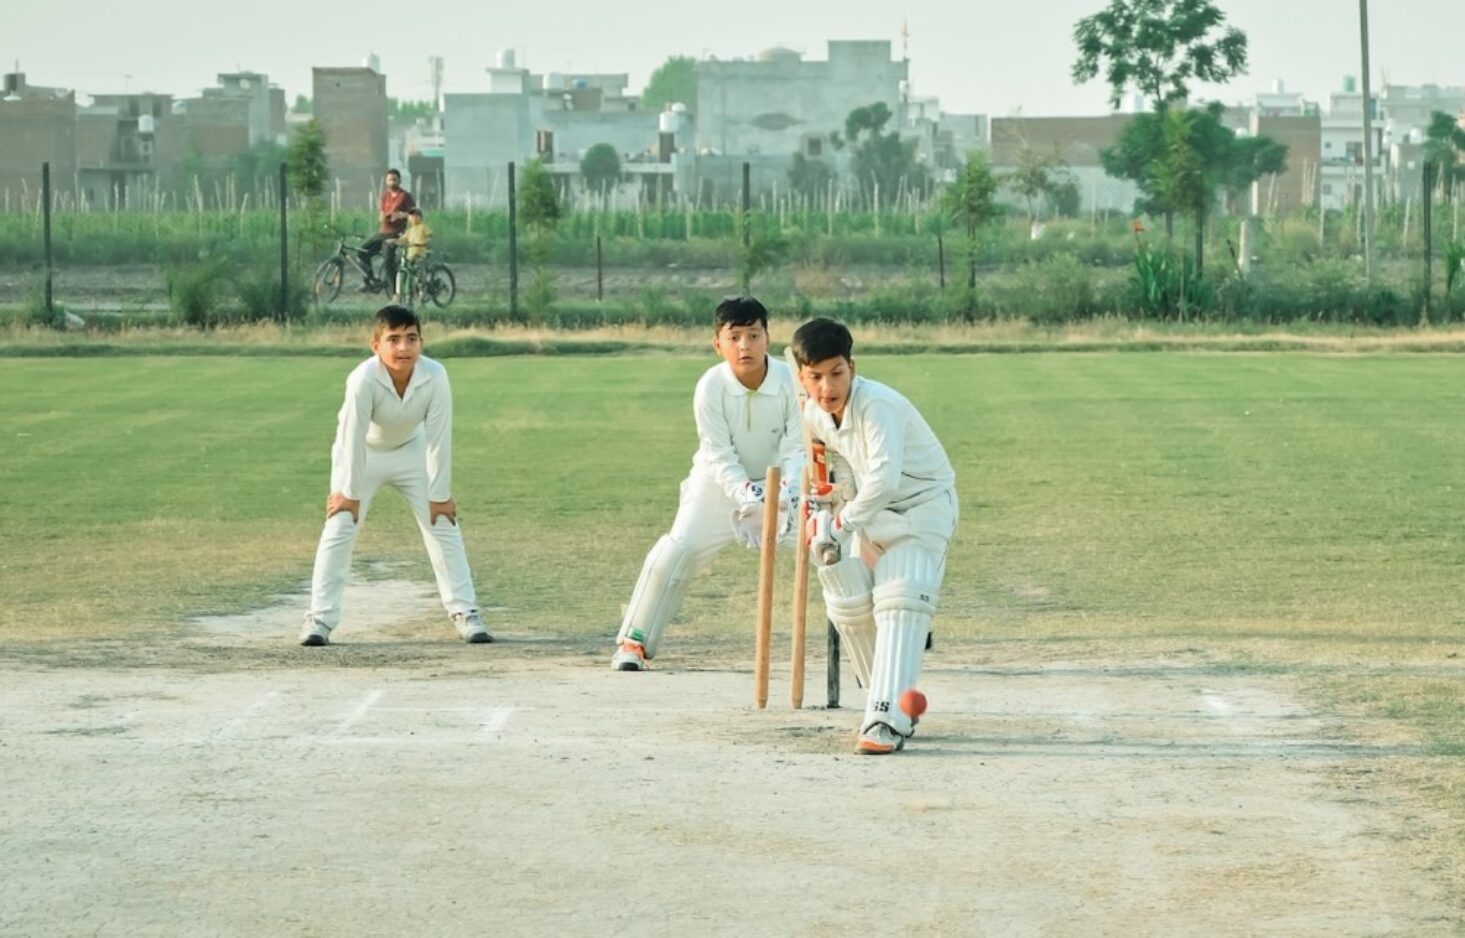 Inspirational Stories of Young Cricketers